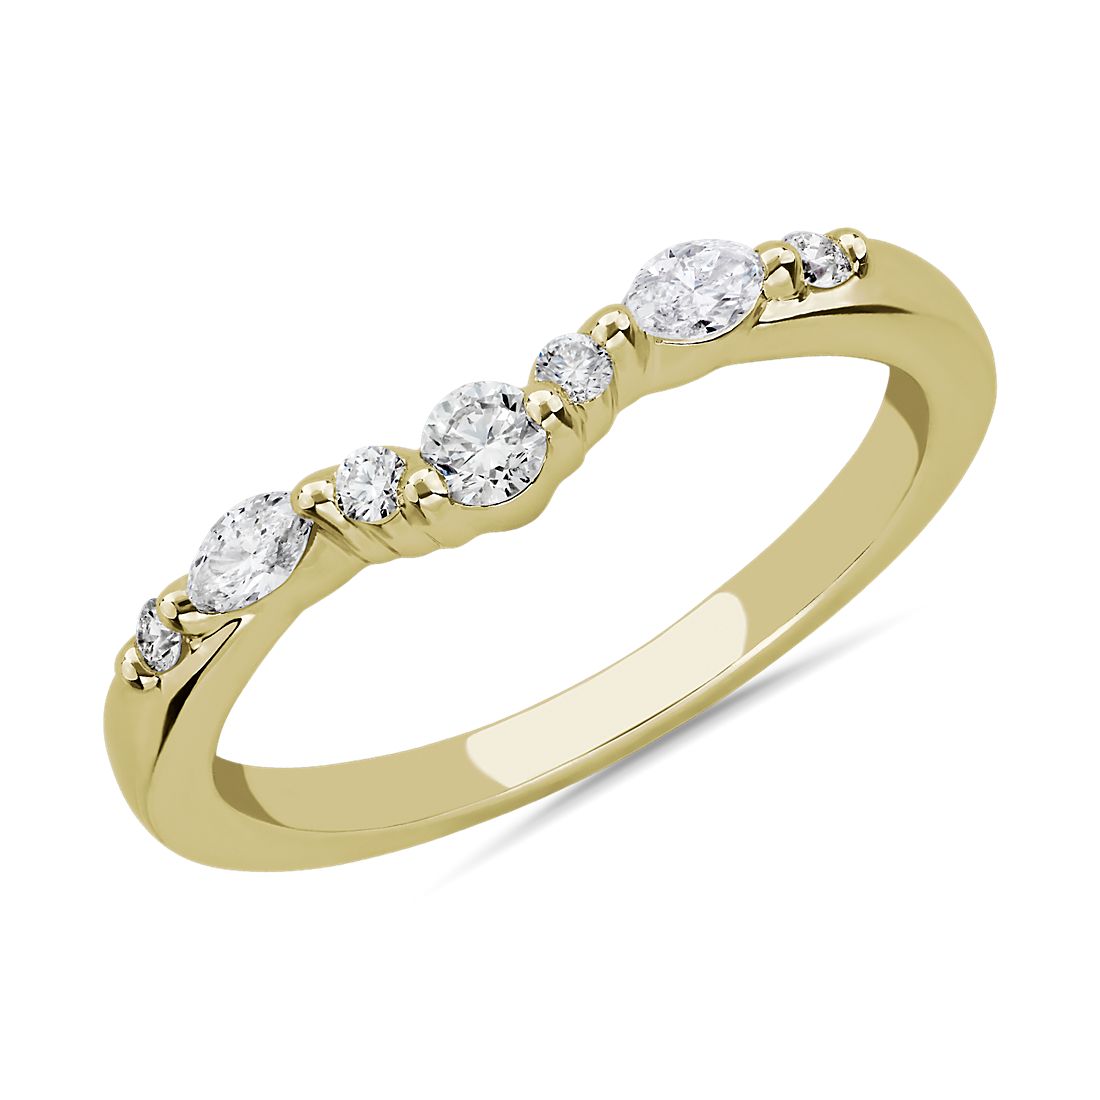 Romantic Round and Marquise Curved Diamond Ring in 18k Yellow Gold (0.23 ct. tw.)